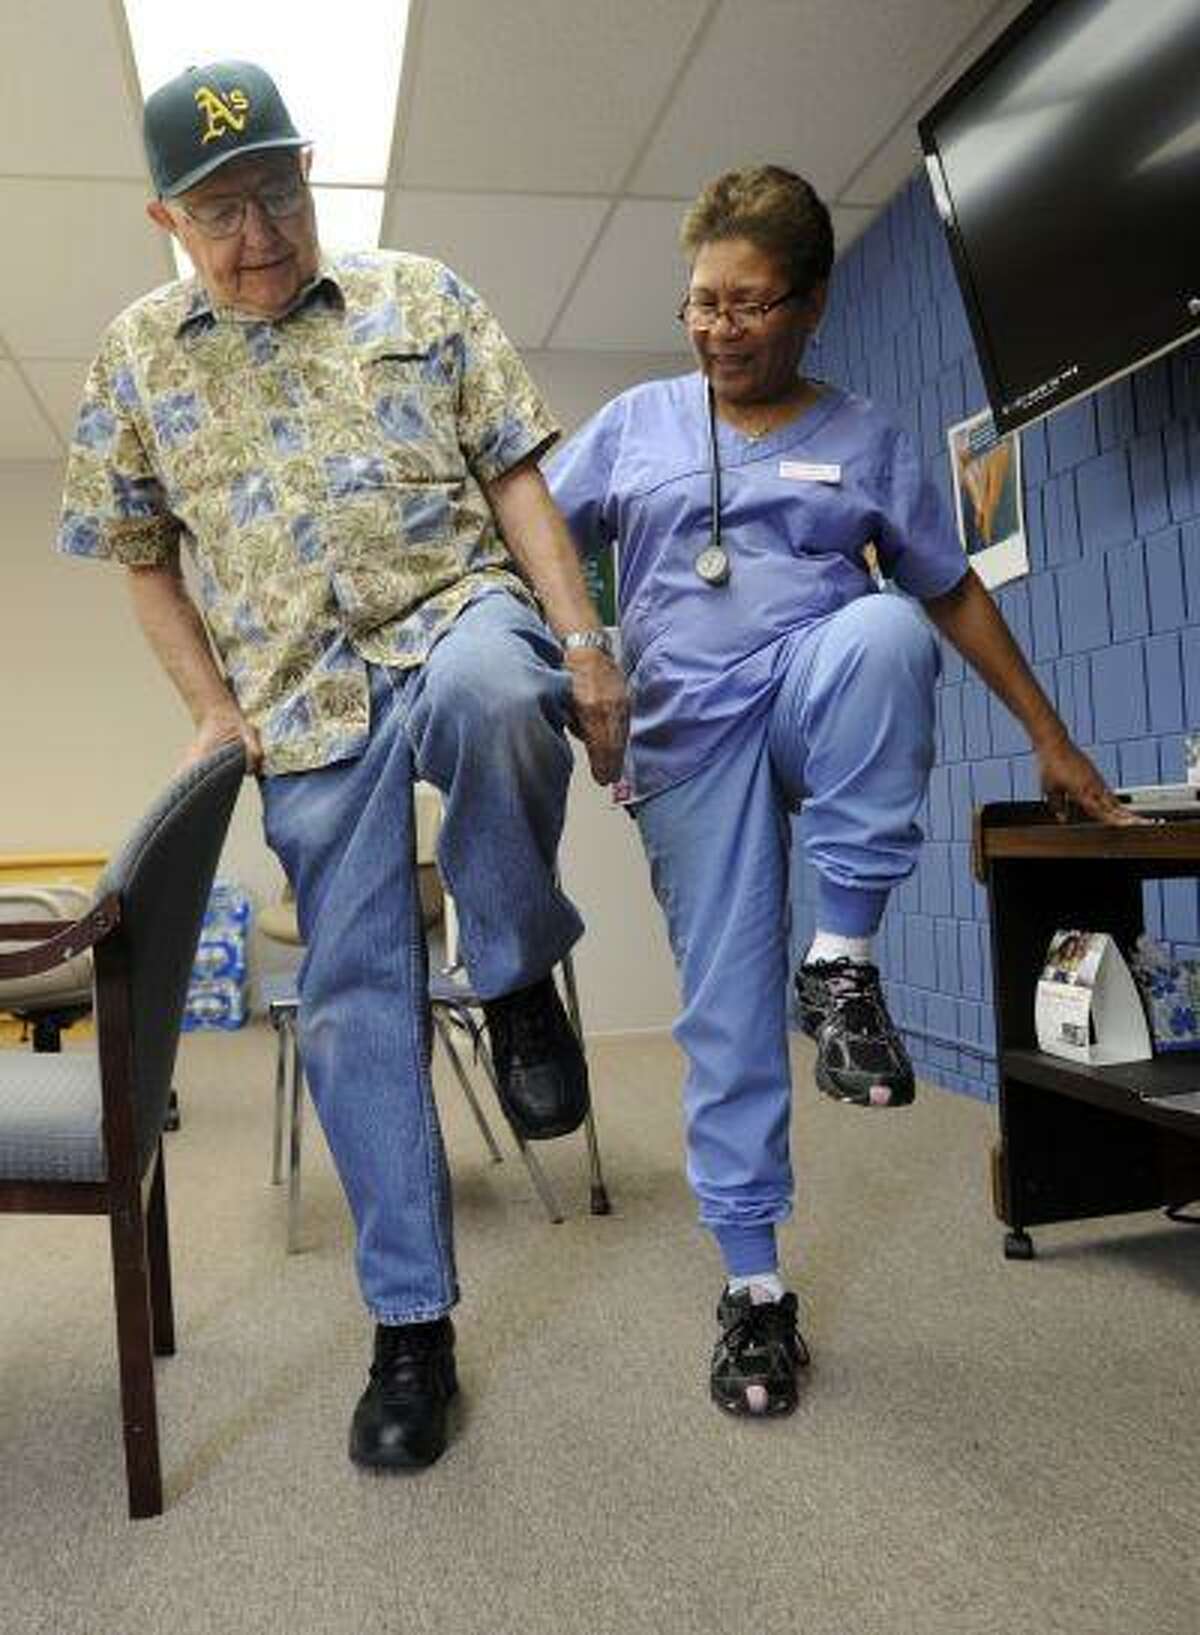 Rosita Gobbell, shows Blackie Blackwell, 87, leg lift exercises he can do to improve his strength and balance at the Meals on Wheels and Senior Outreach Services in Walnut Creek, Calif., on Monday, July 15, 2013.(Susan Tripp Pollard/Bay Area News Group)